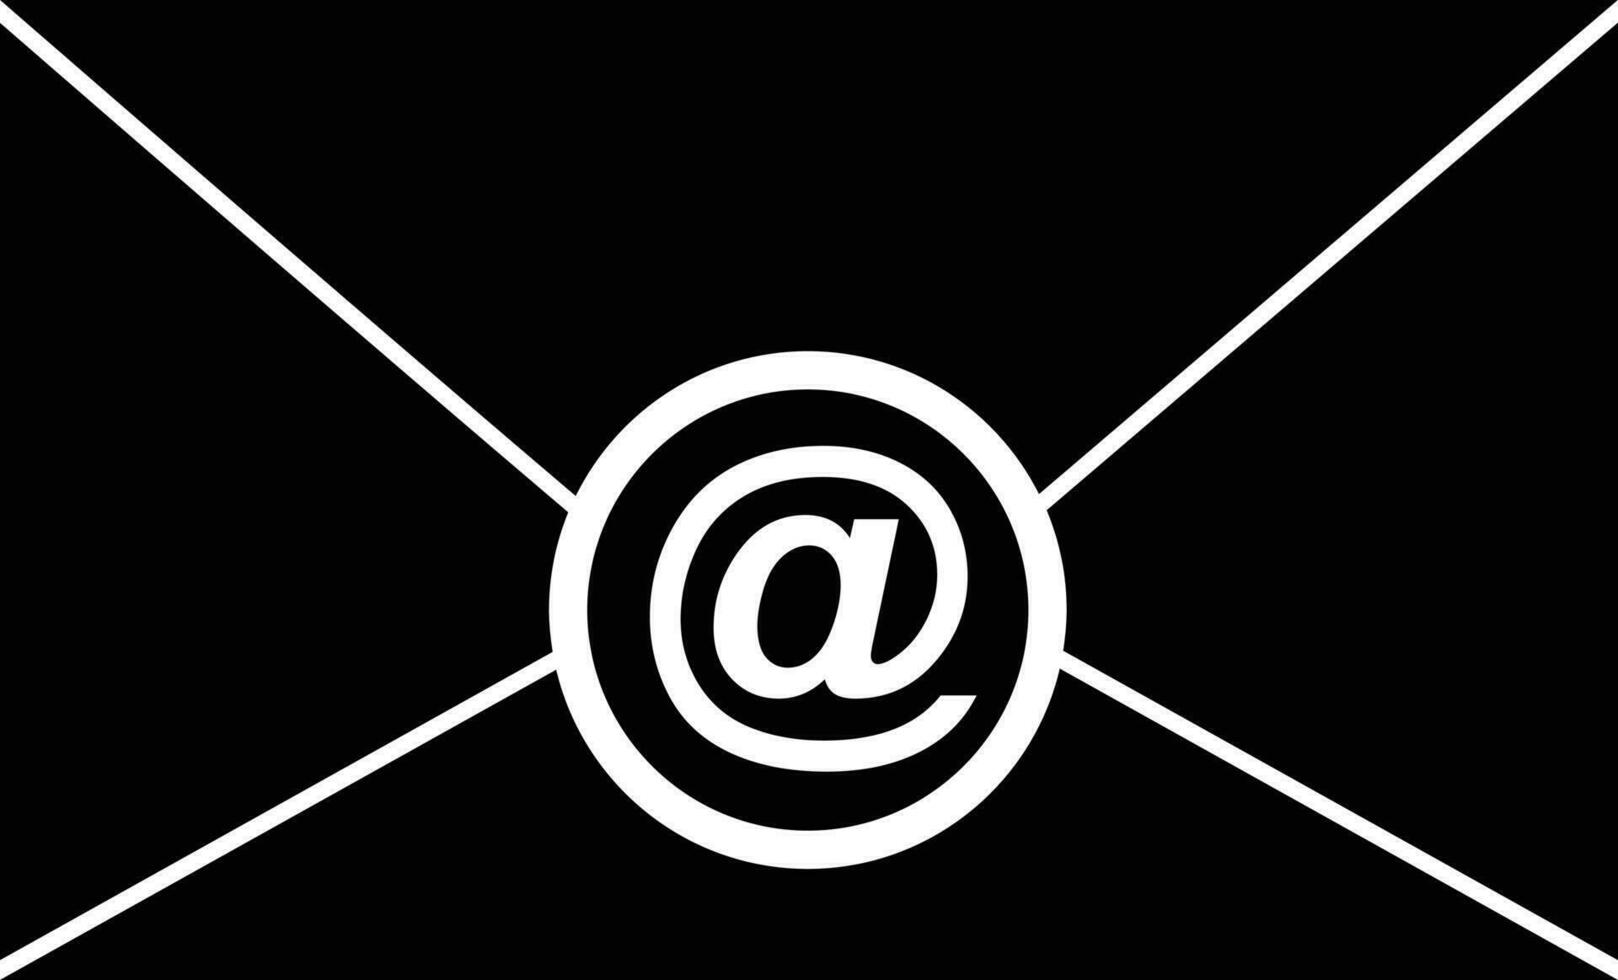 Flat mail or envelope icon or symbol. vector